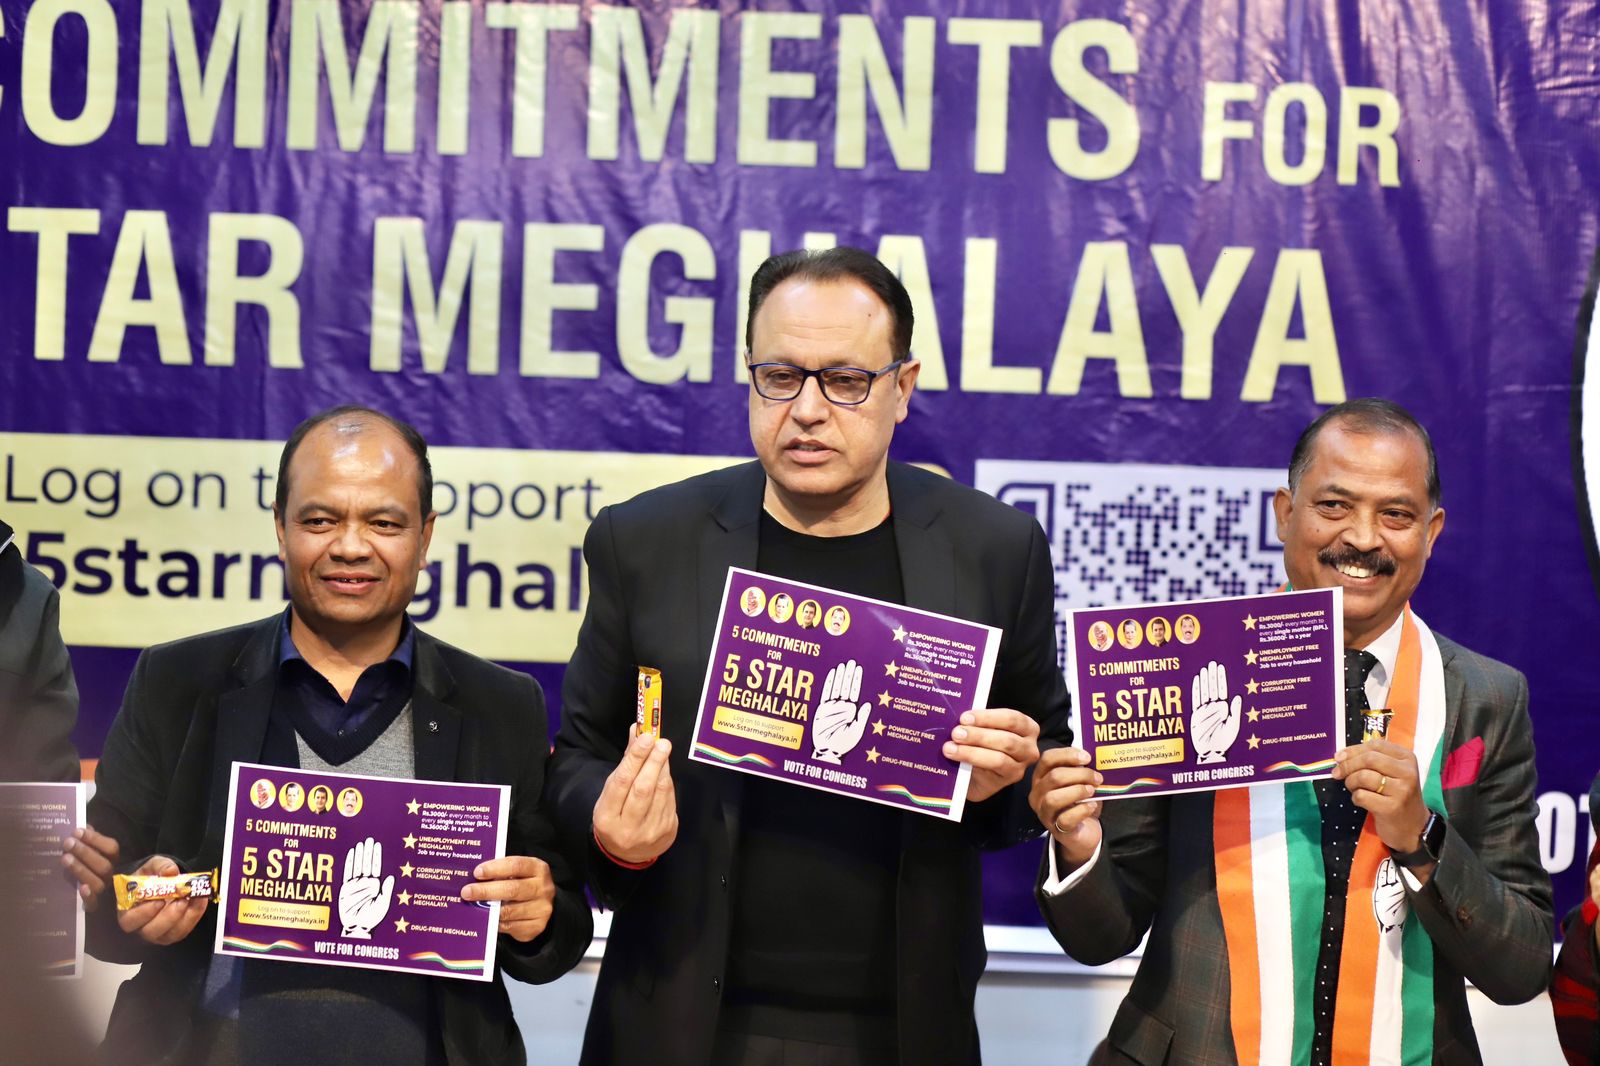 Congress makes 5 commitments for 5 star Meghalaya; Women empowerment top on priority